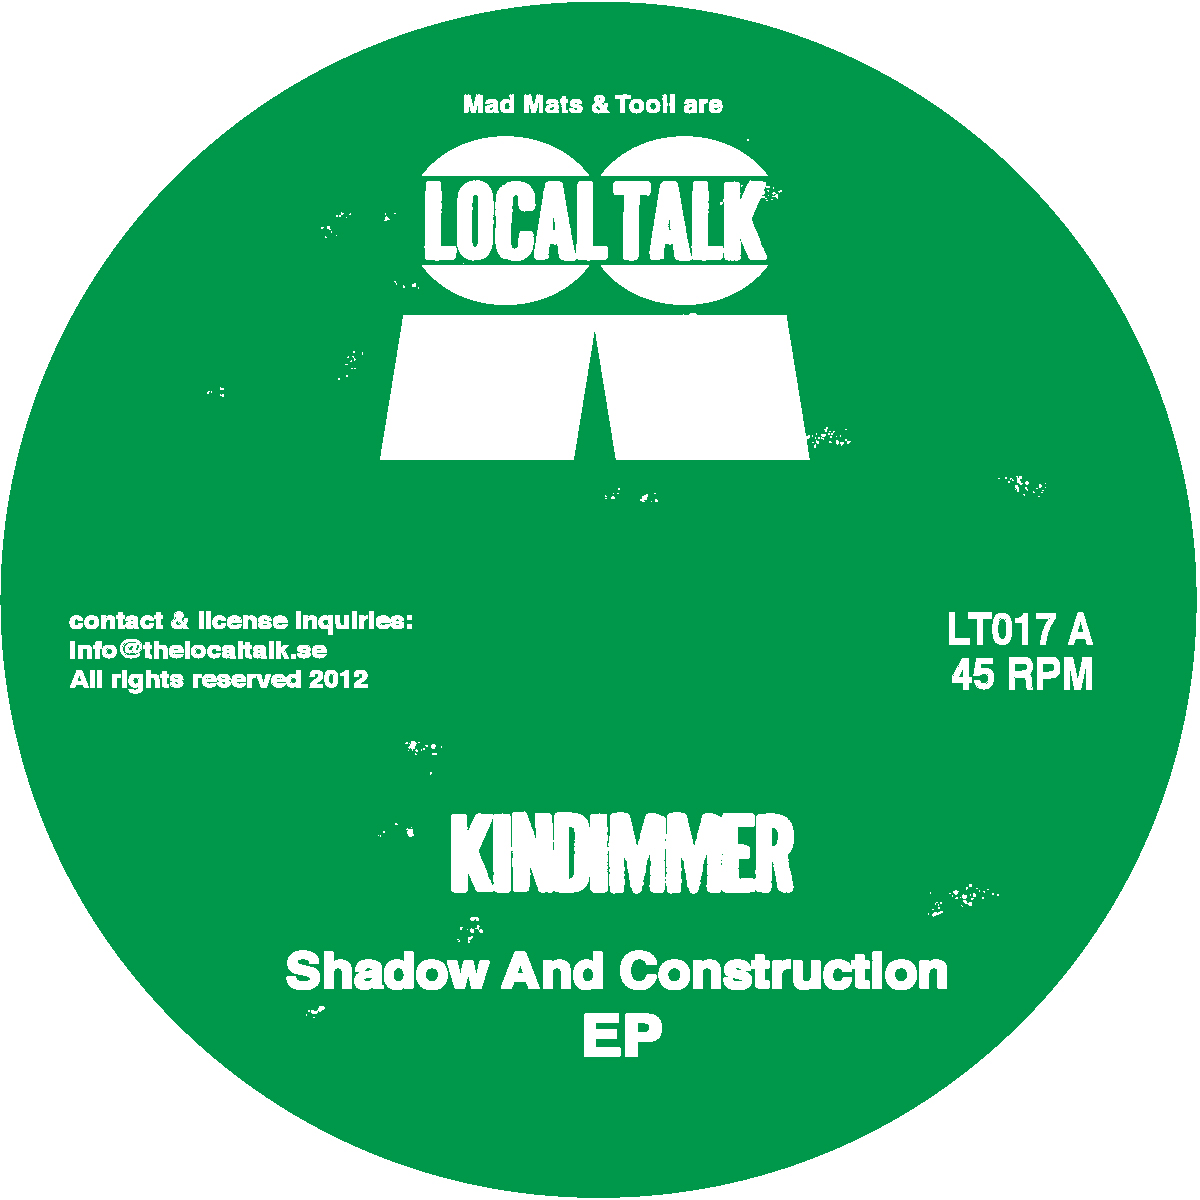 Kindimmer - Shadow And Construction EP